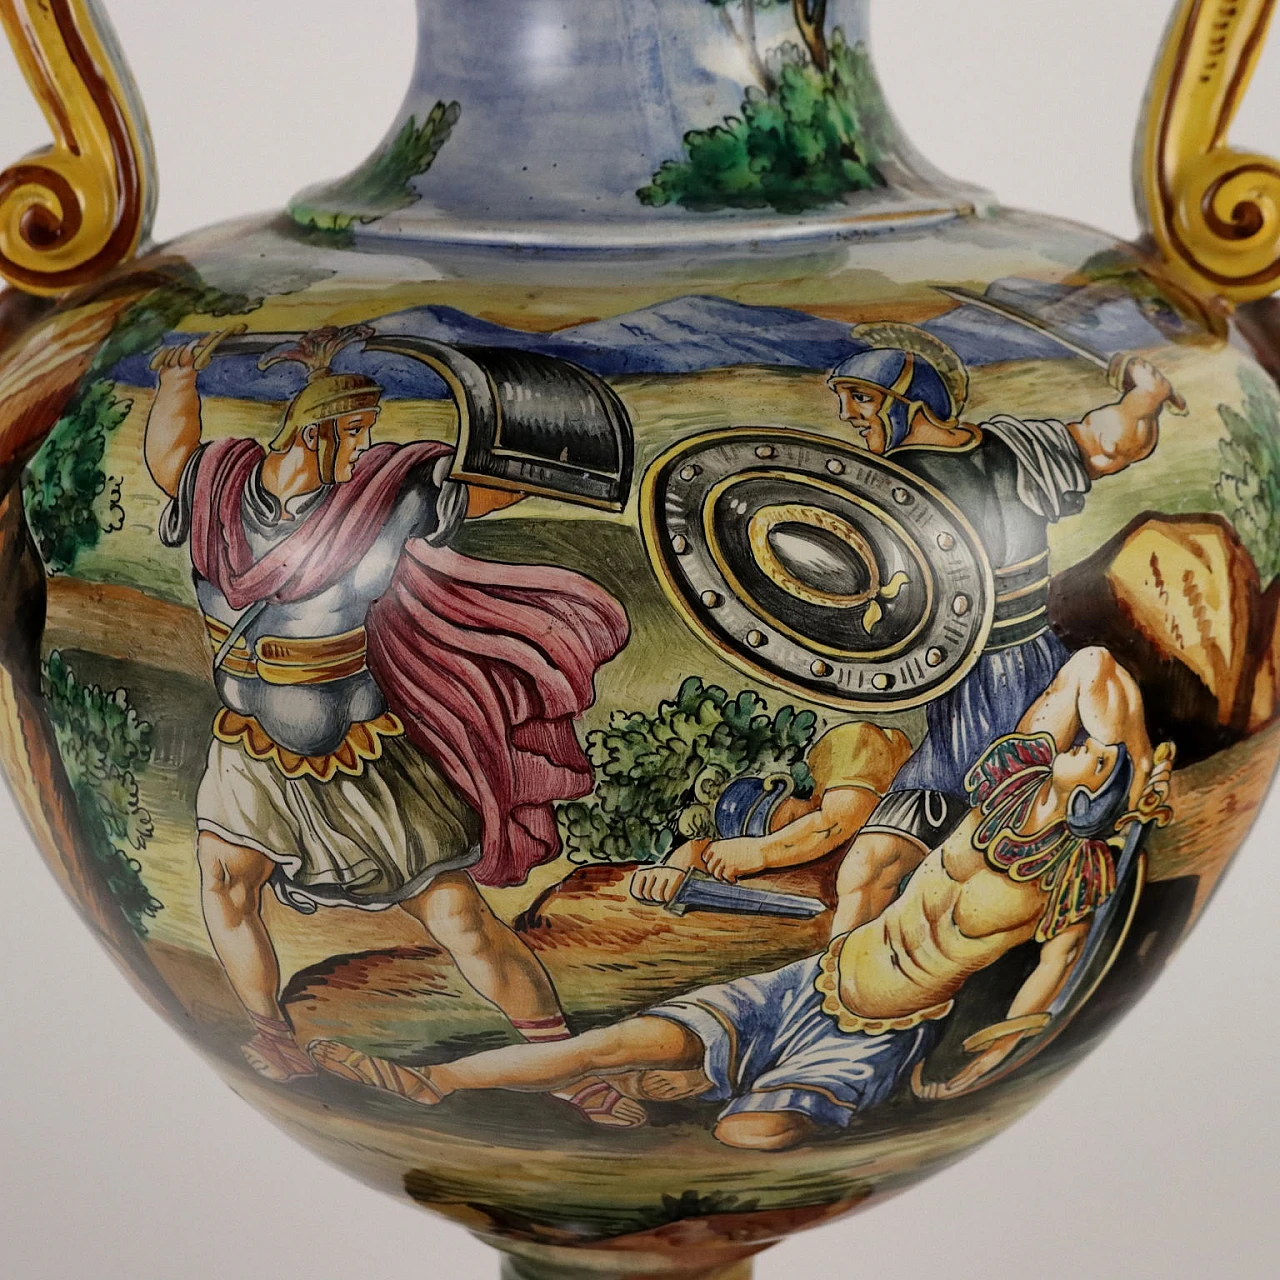 Painted majolica vase with winged figures and masks 4